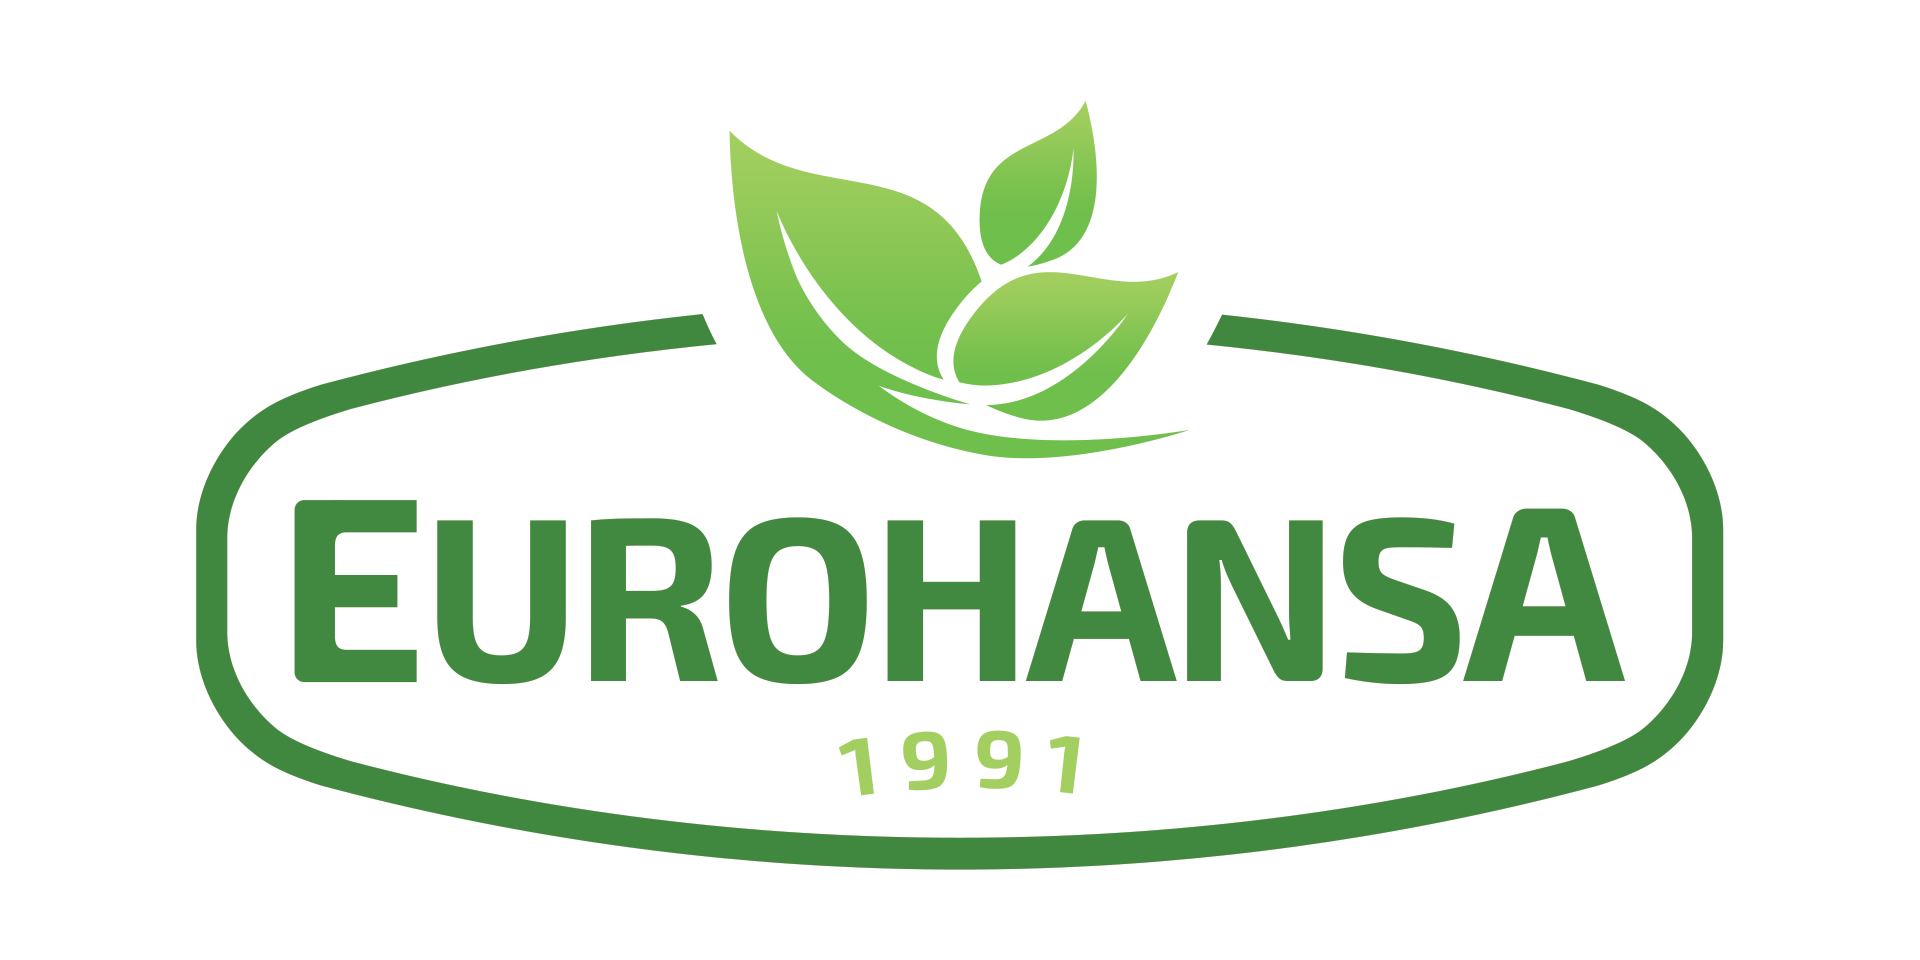 Manufacturer of fillings and fillings for confectionery products - EUROHANSA